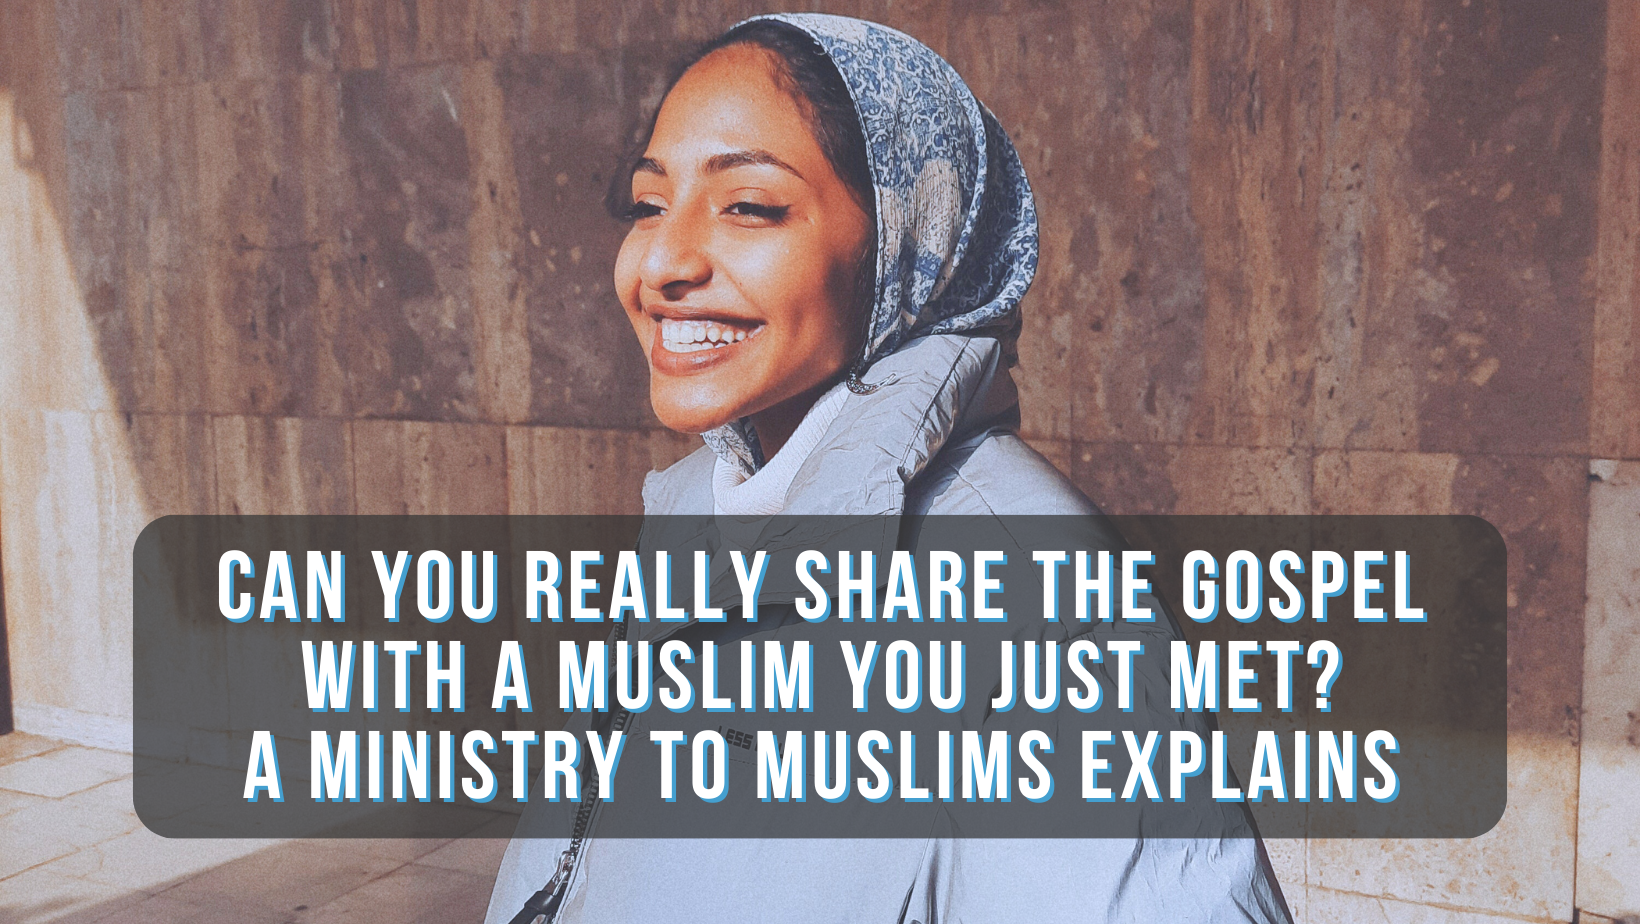 Can you really share the Gospel with a Muslim you just met? A ministry to Muslims explains